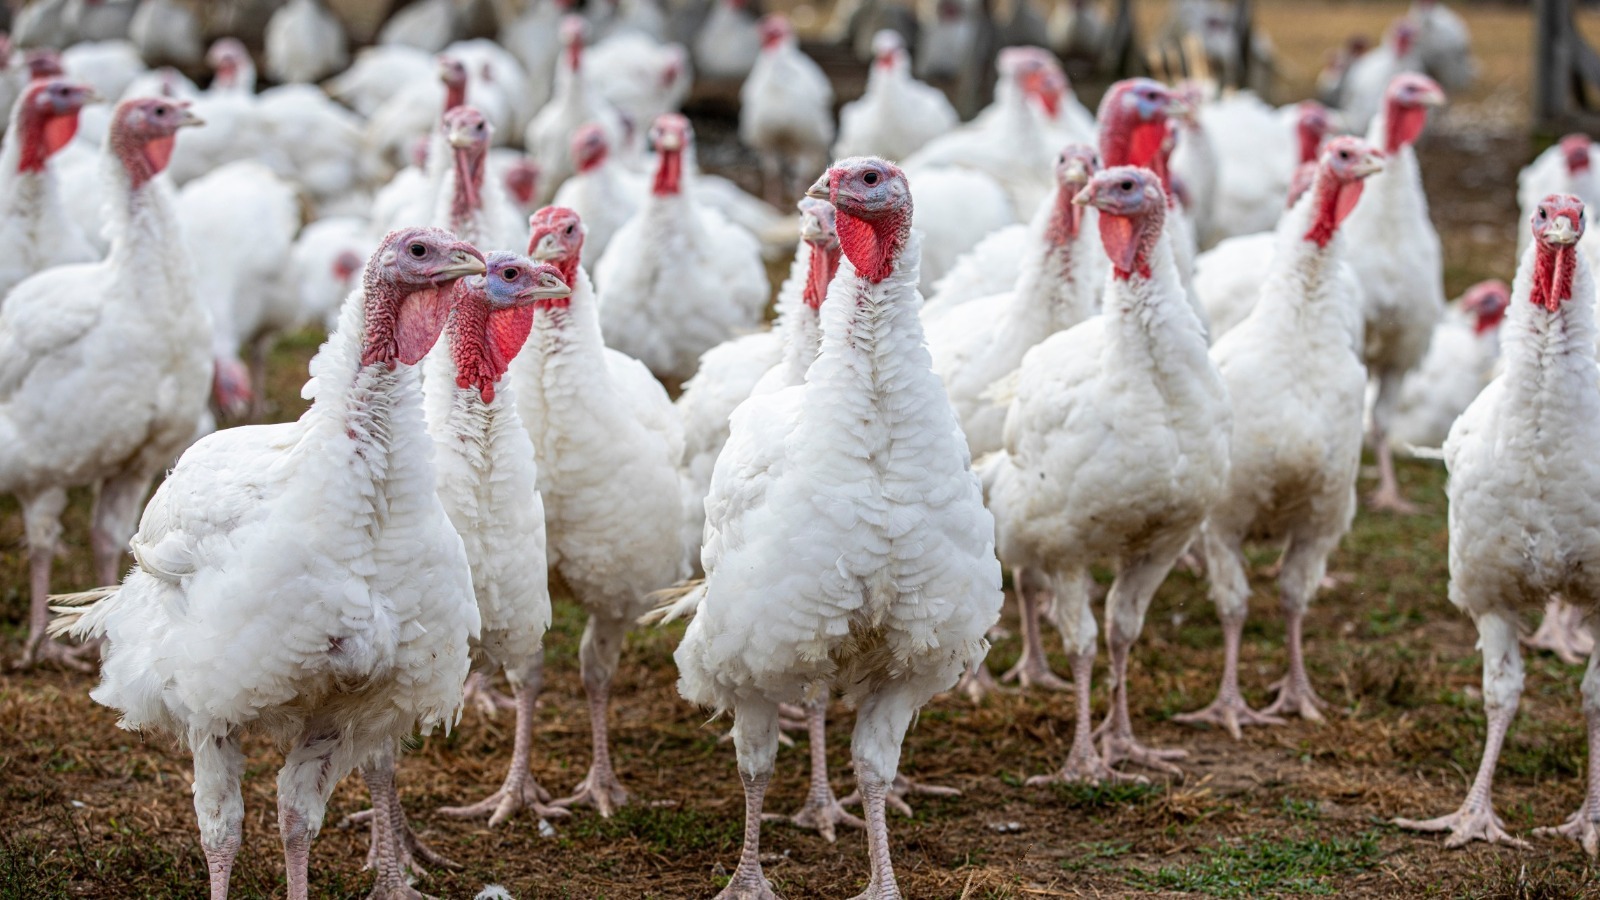 Everything We Know About The Avian Flu Outbreak